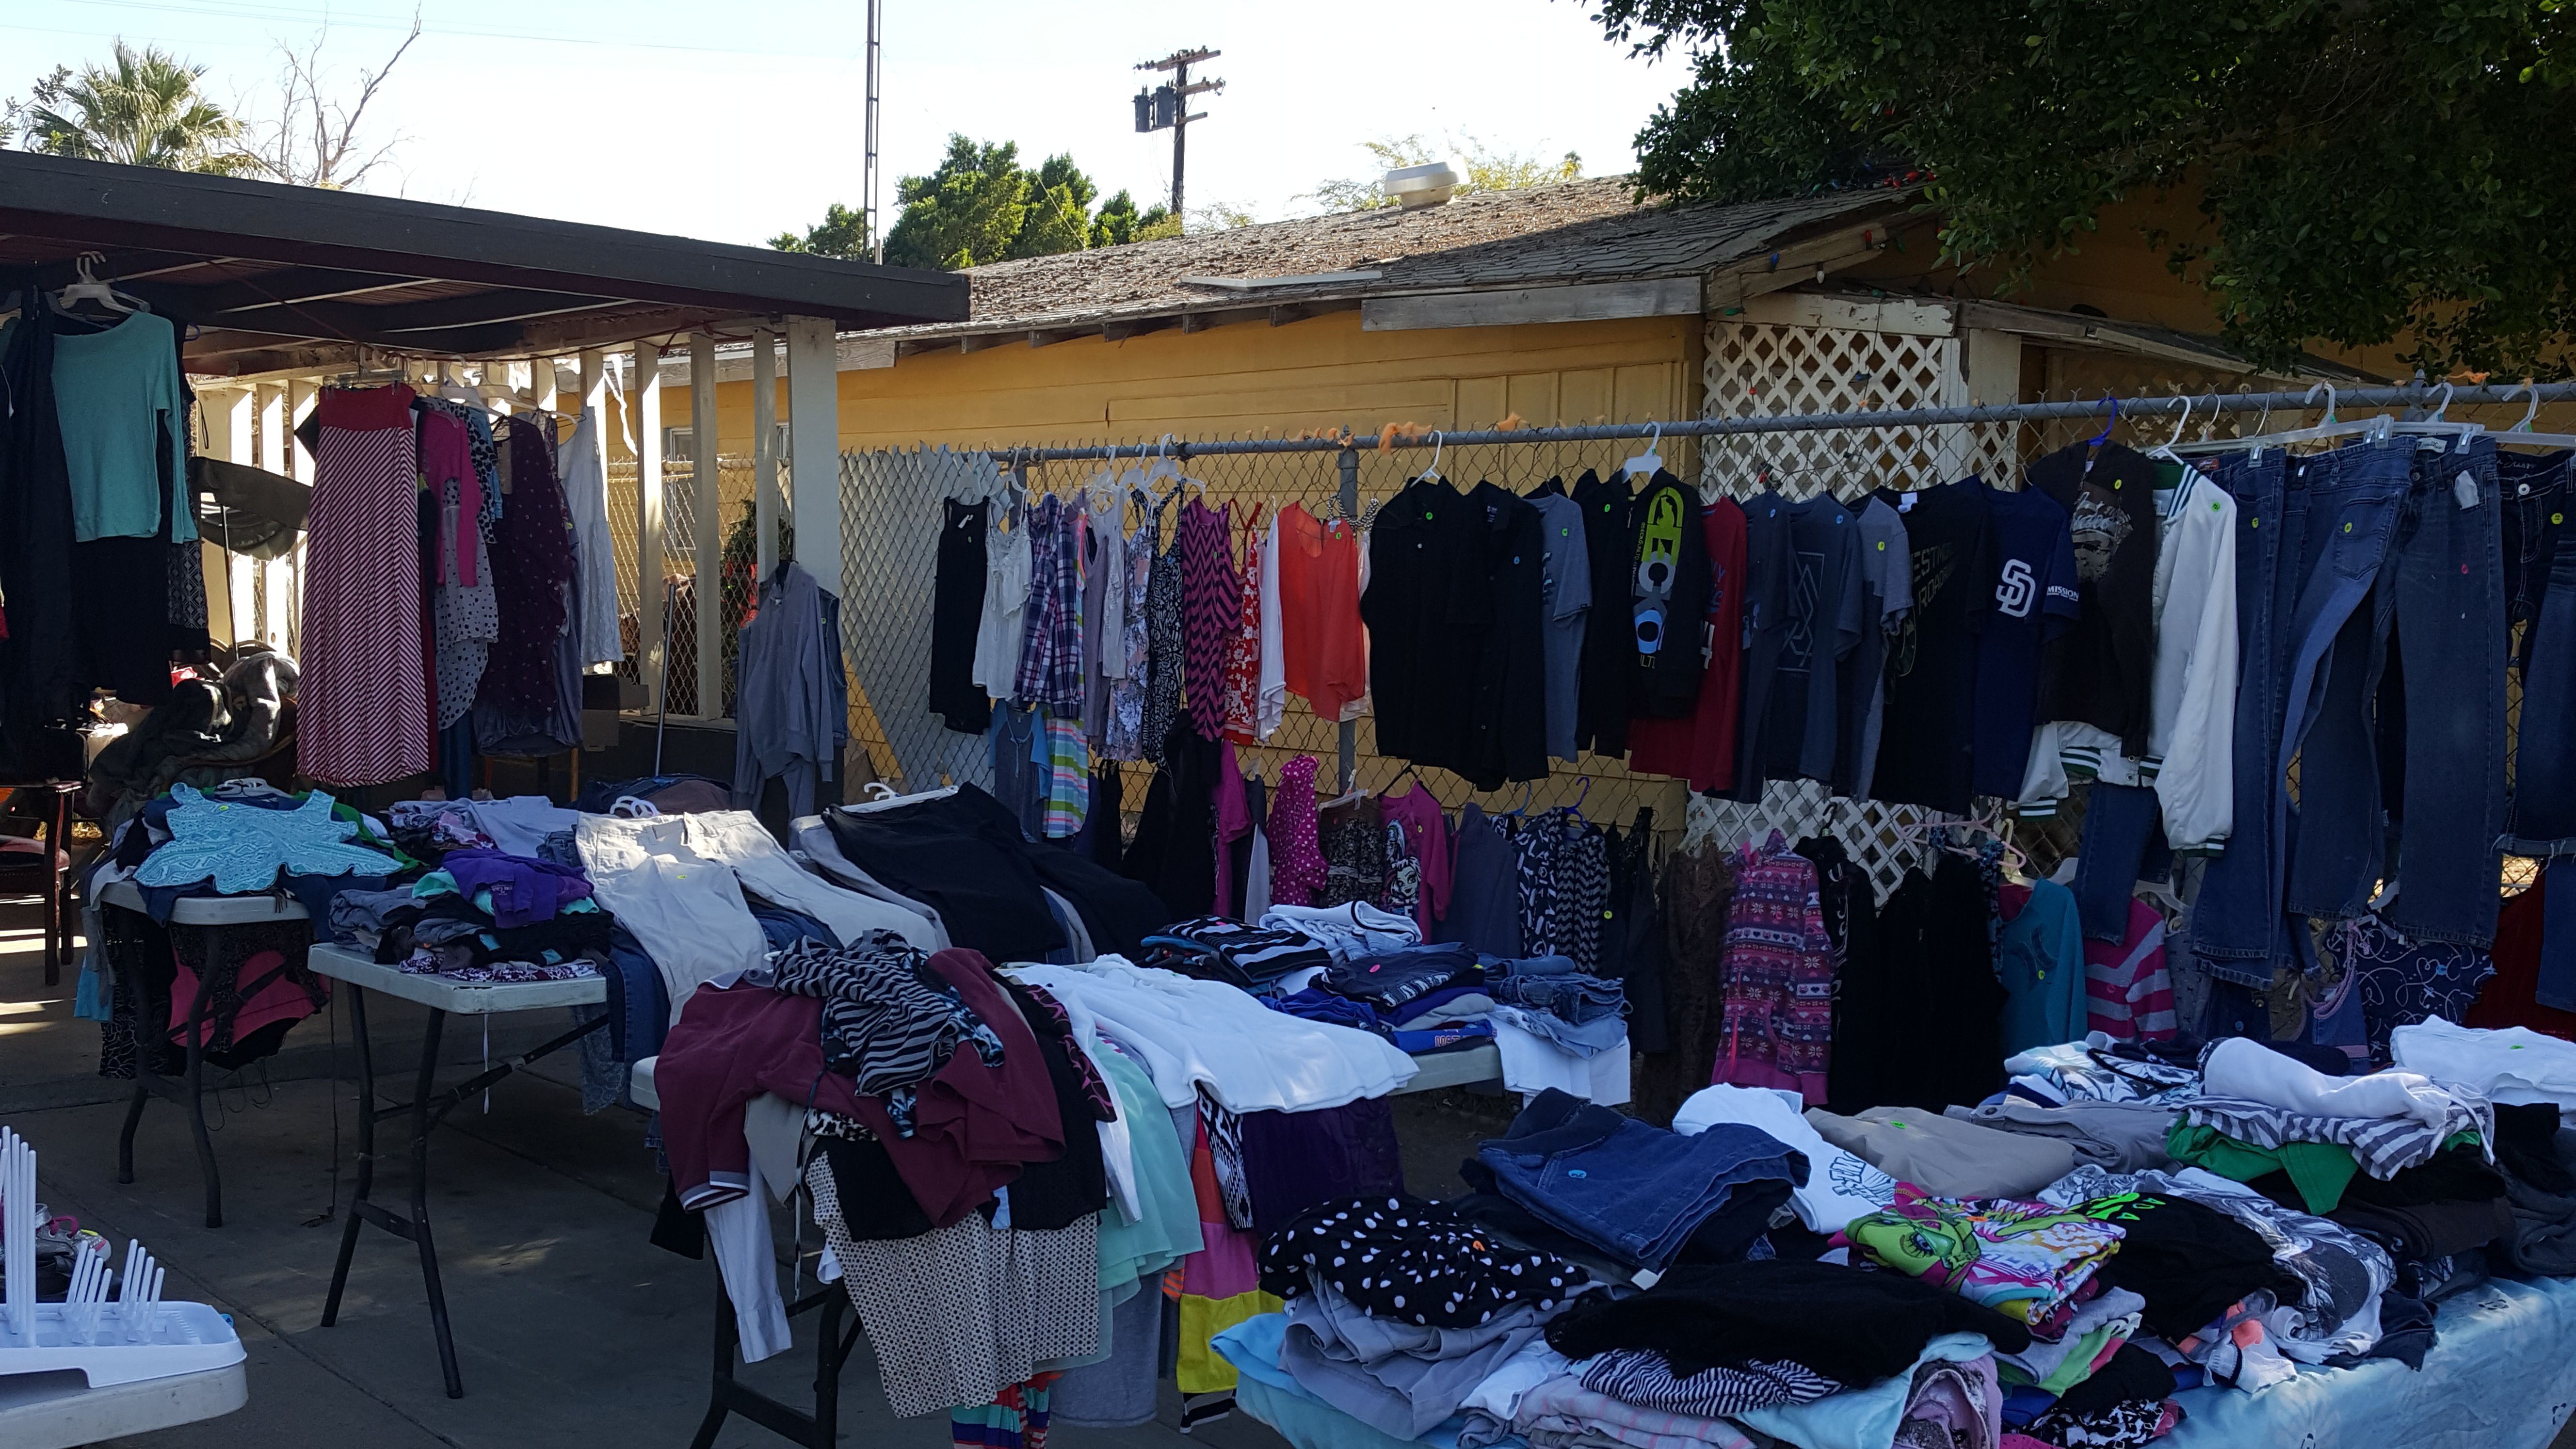 Yard sale (clothes,shoes,baby items,etc)